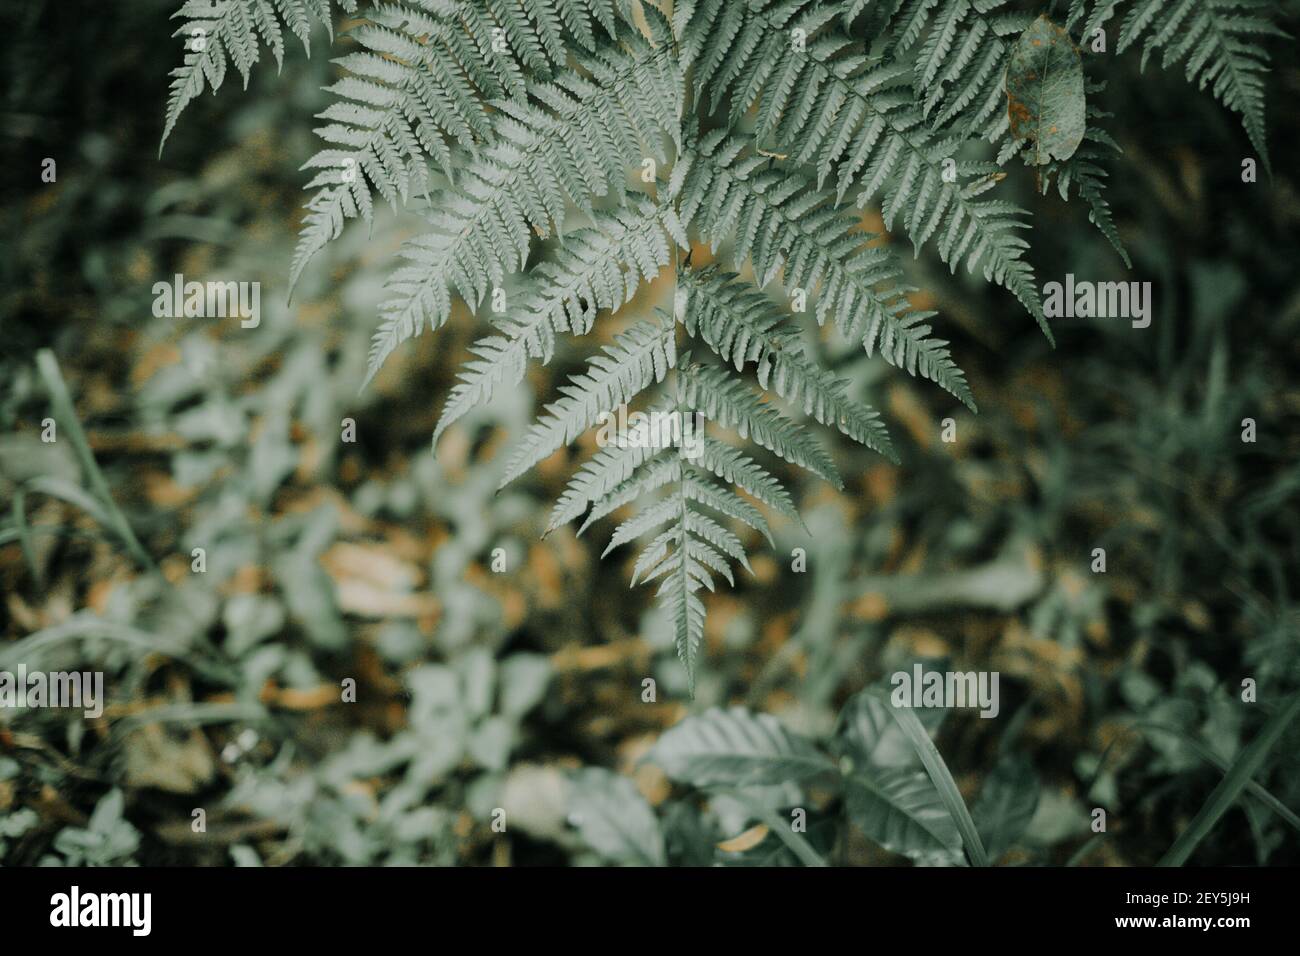 A hanging Diamondleaf fern frond with green small leaves Stock Photo